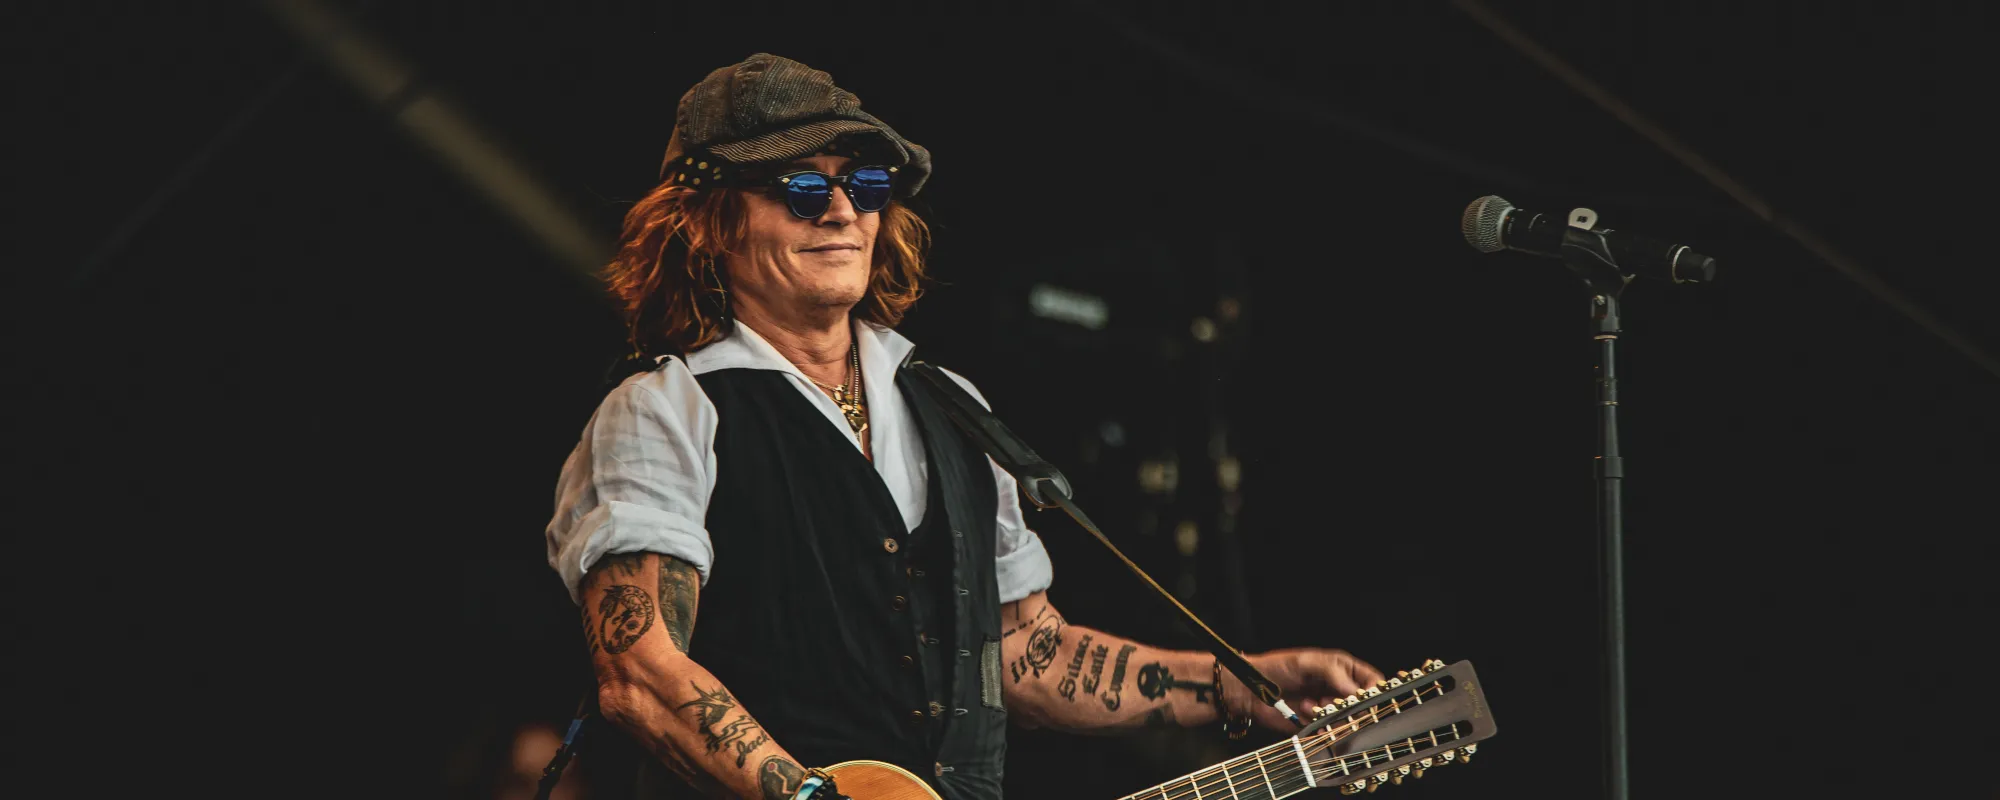 5 Songs You Didn’t Know Johnny Depp Wrote and Composed